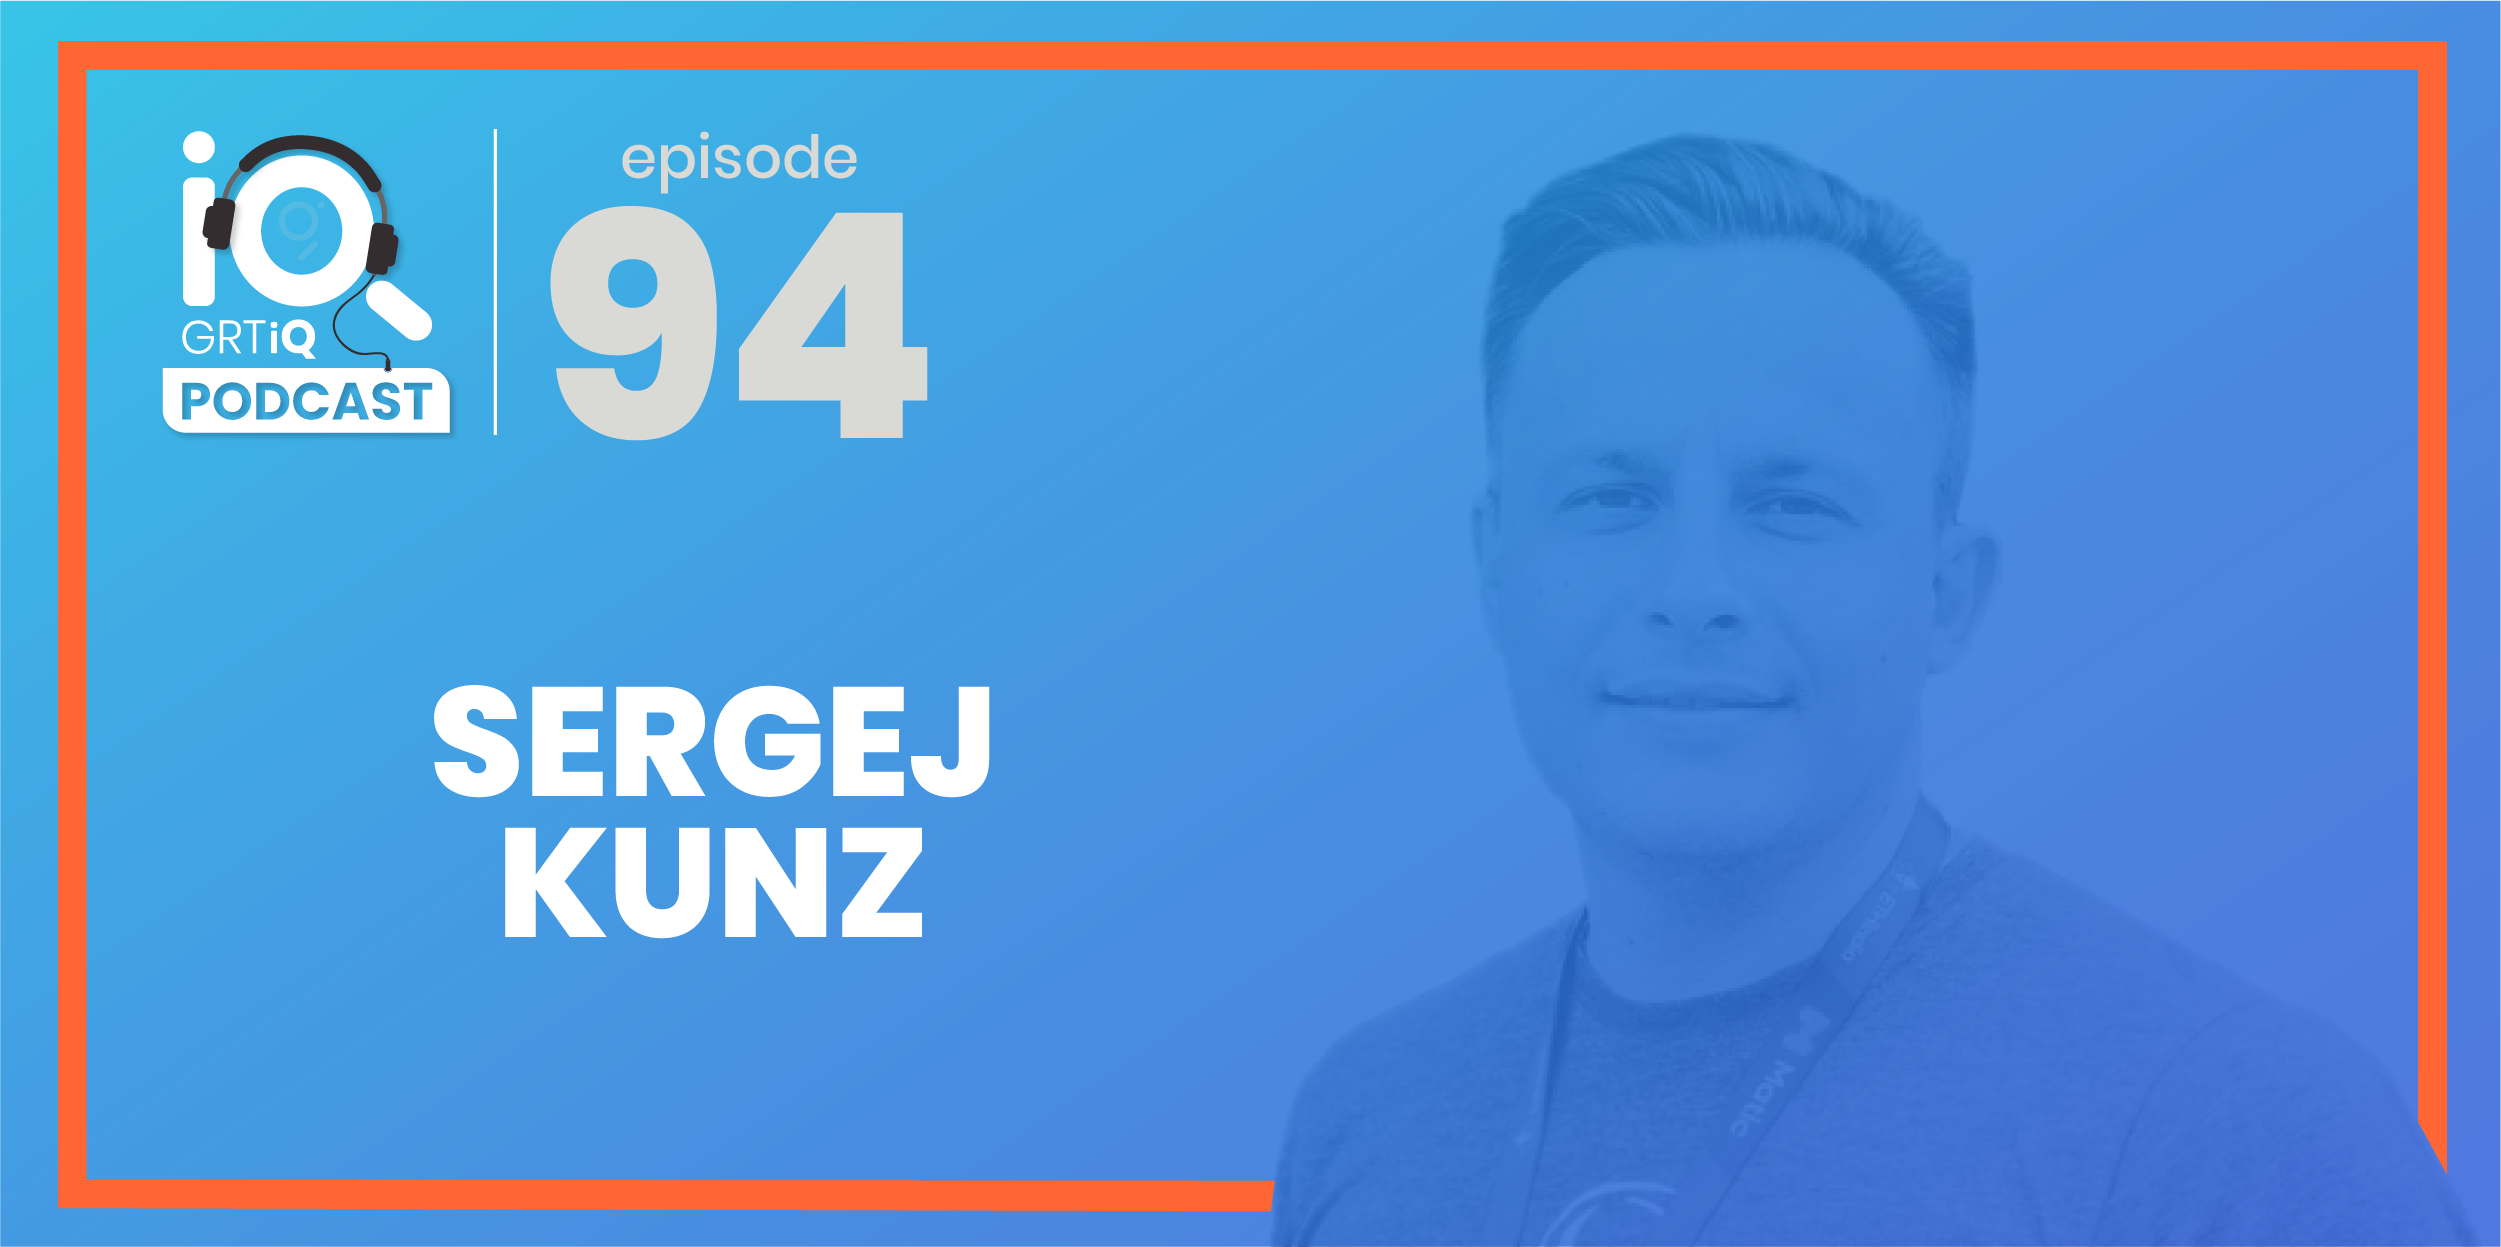 Today I’m speaking with Sergej Kunz, Co-Founder of 1inch Network, a leading DeFi solution and exchange aggregator that scans decentralized exchanges to find the lowest cryptocurrency prices for traders.